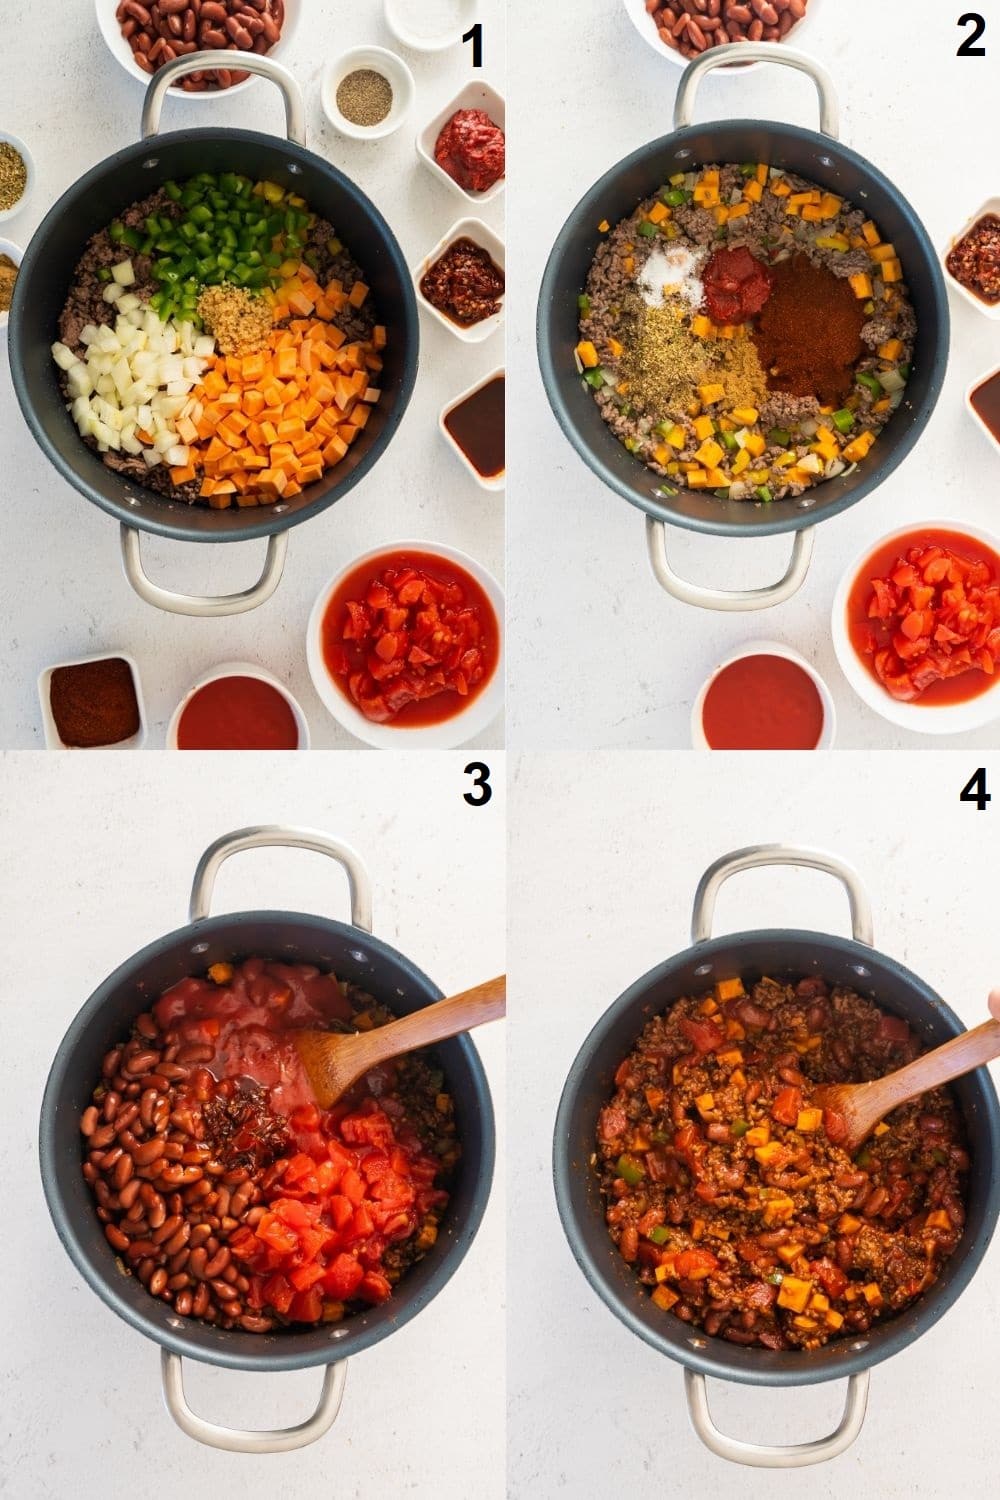 Photo collage showing 4 images of steps to take when making homemade chili with beef and sweet potatoes